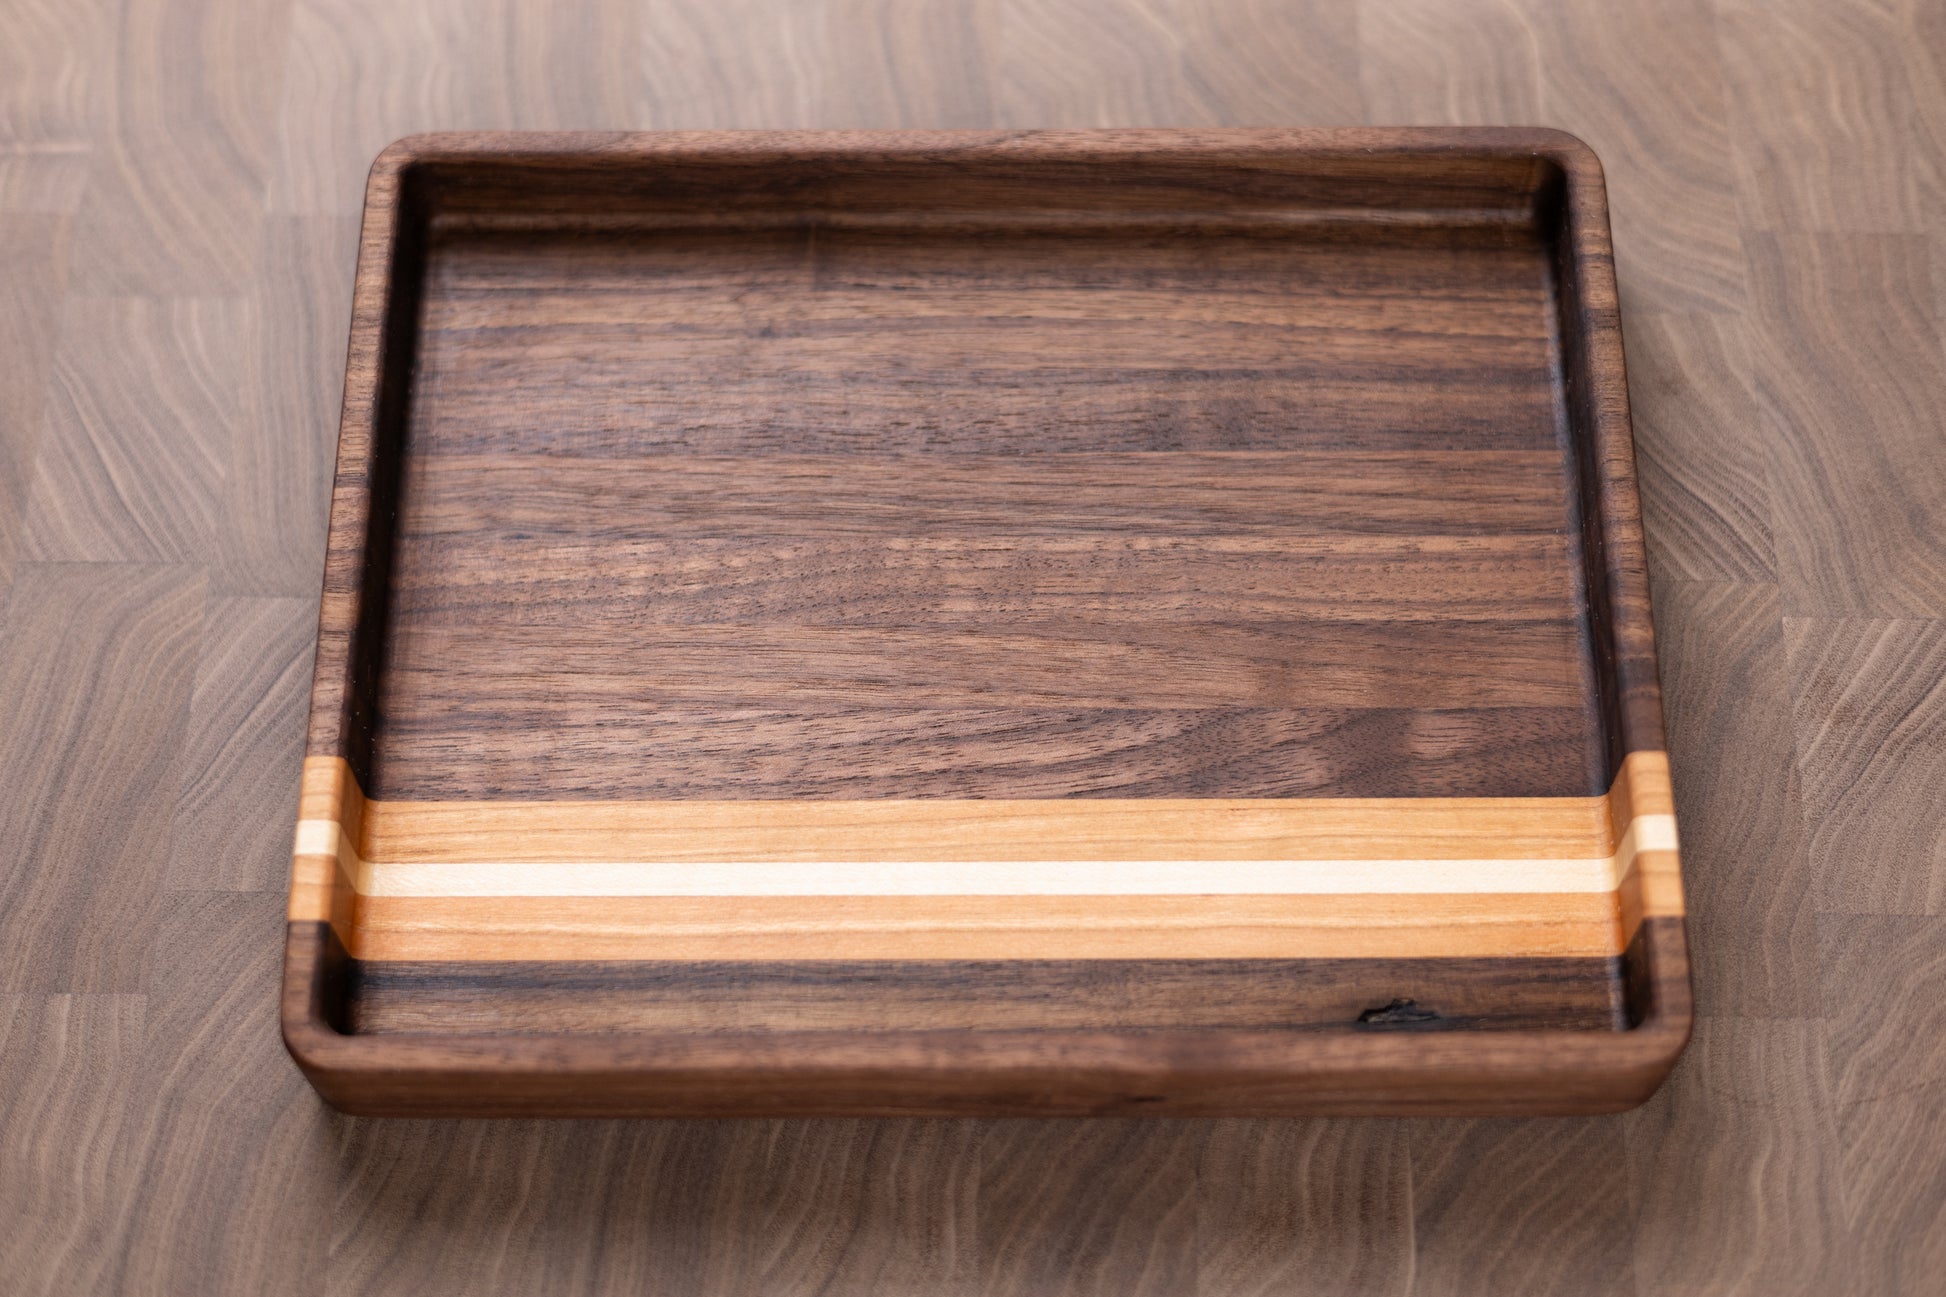 Hardwood Valet Tray with Maple and Cherry Stripes